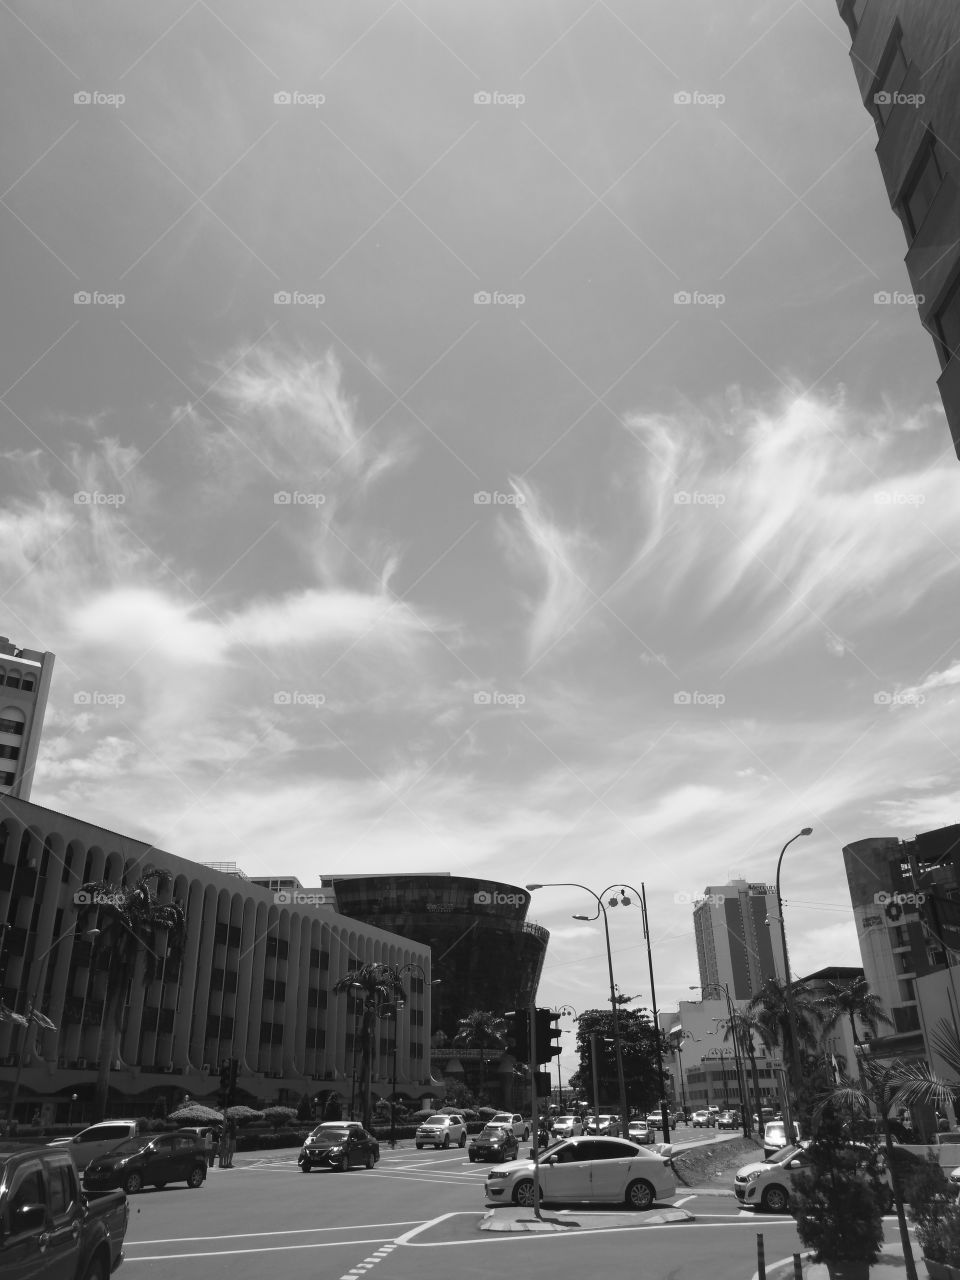 City, traffic and the sky in mono